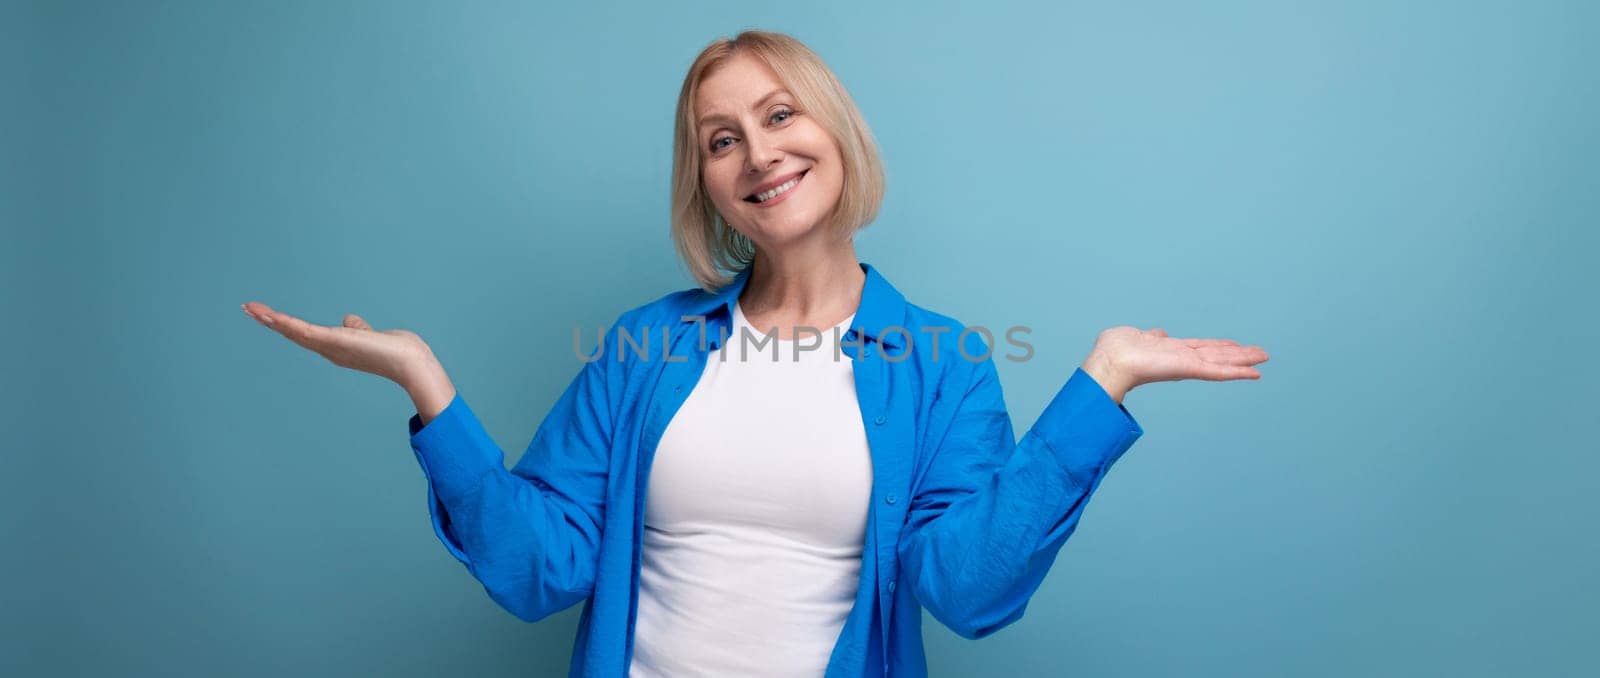 blond mature woman with pleasant smile on studio background.